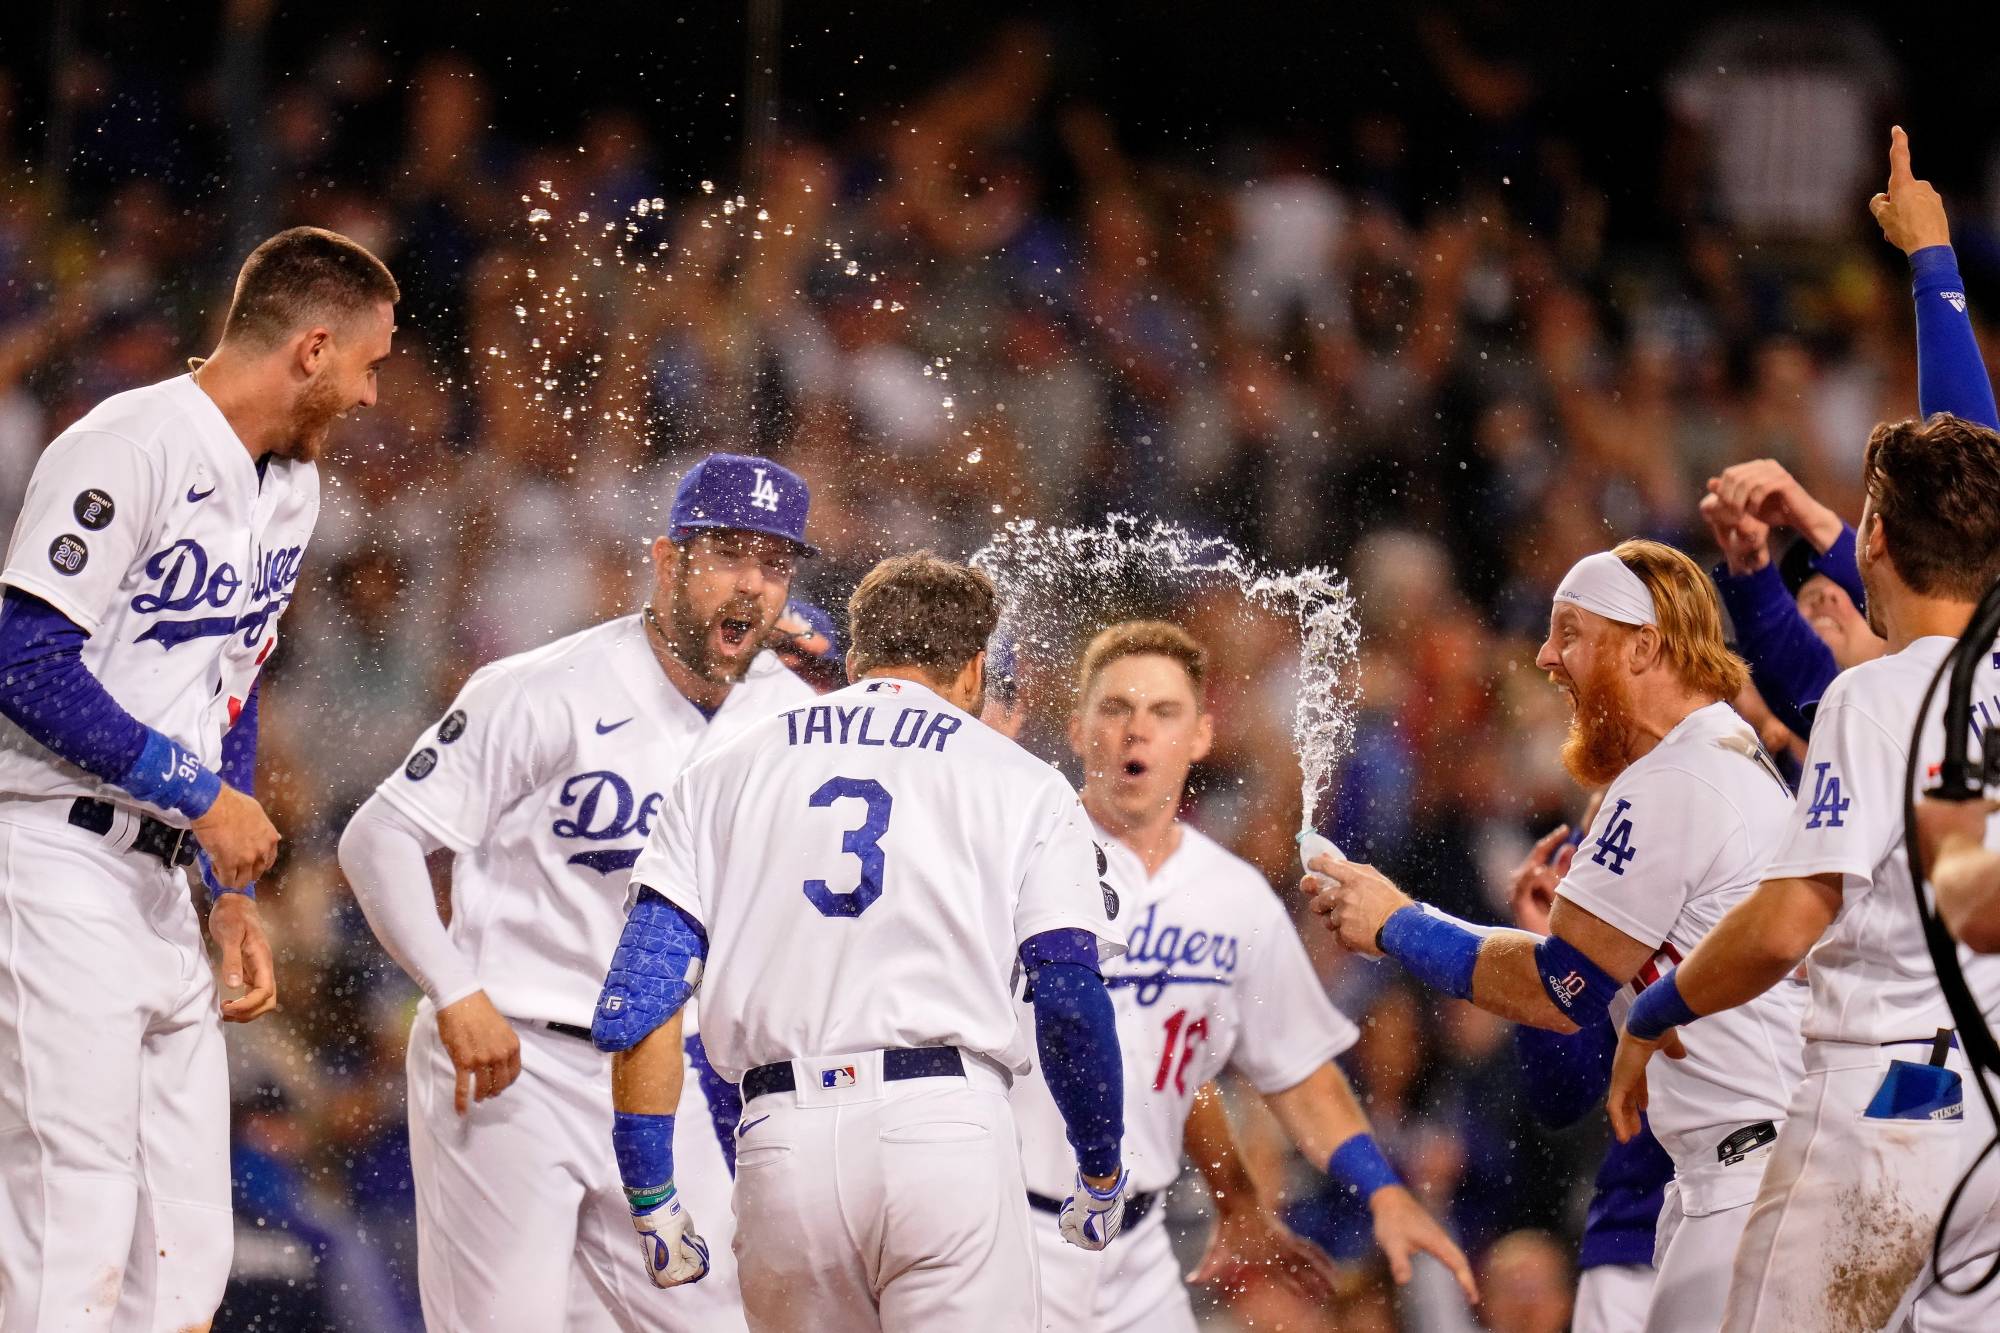 Chris Taylor hits walk-off home run to lift Dodgers over Cardinals in NL wild-card game